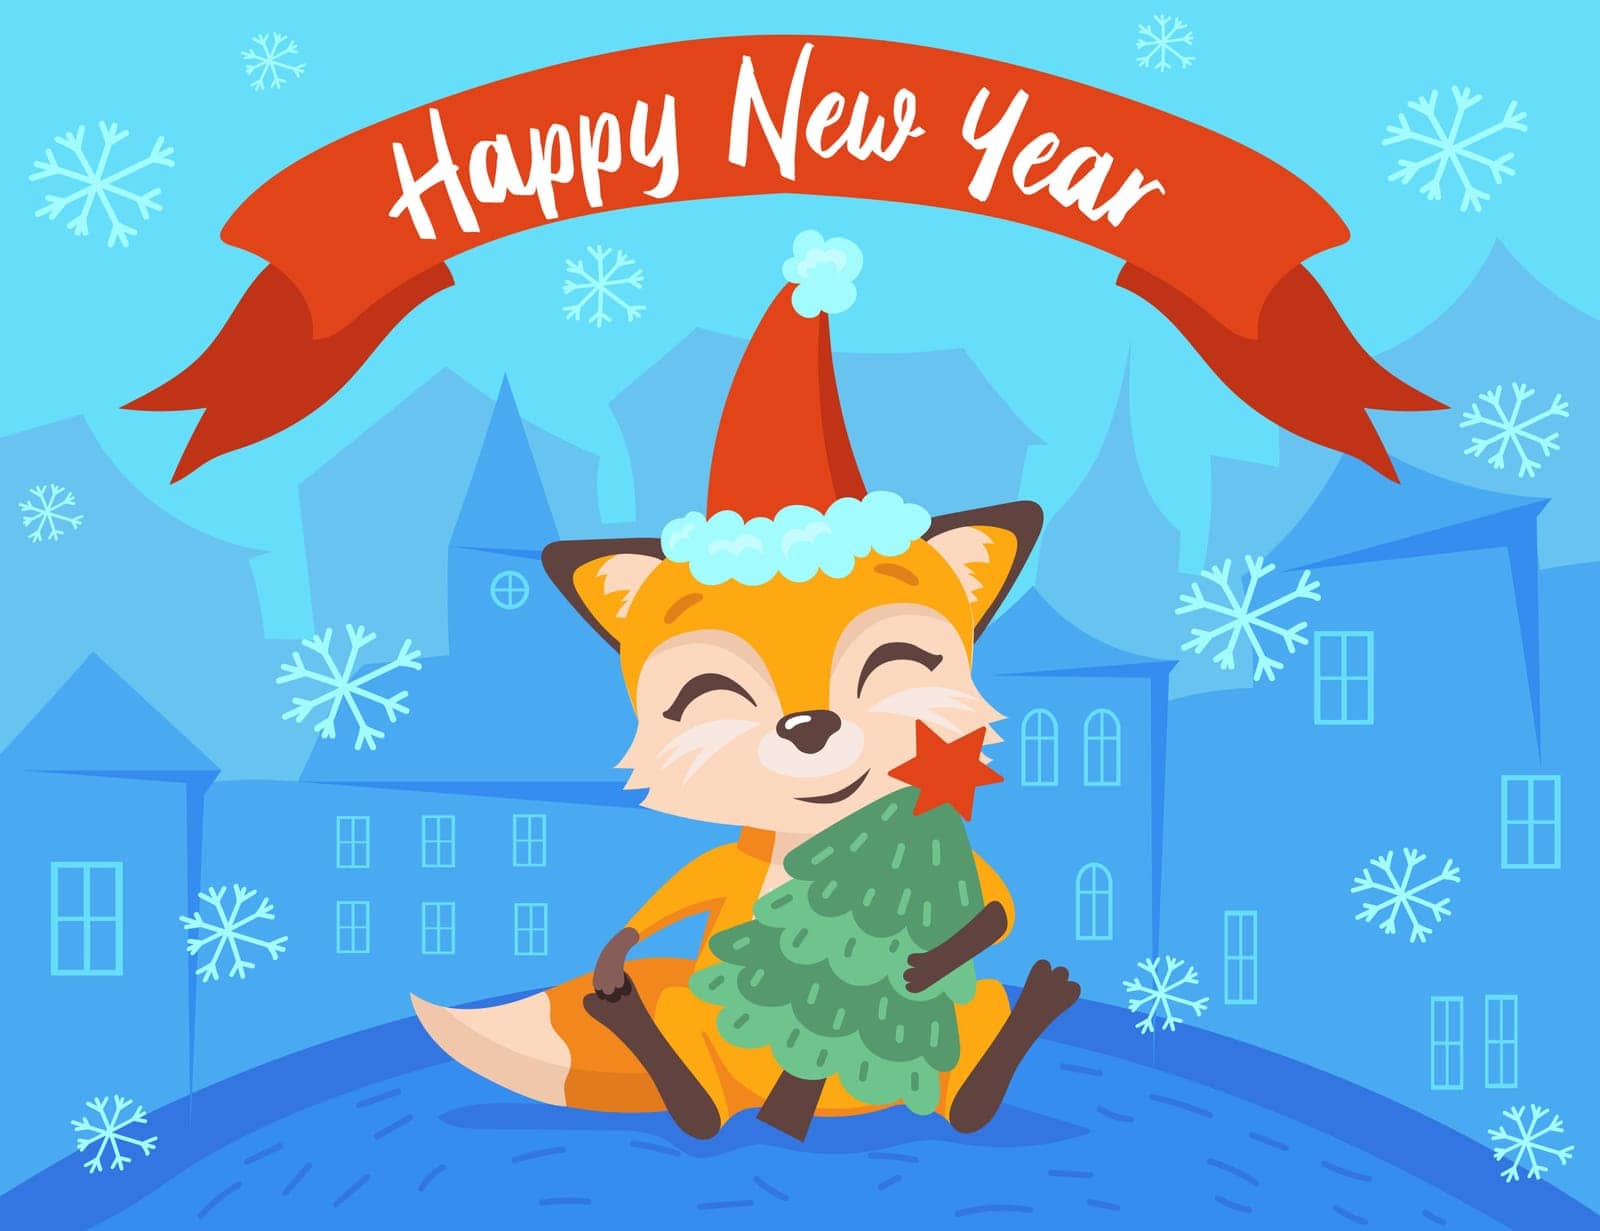 Smiling fox character with Christmas tree cartoon illustration. Orange mammal wearing hat, sitting in front of houses in winter. Holidays, seasons, greeting, card concept